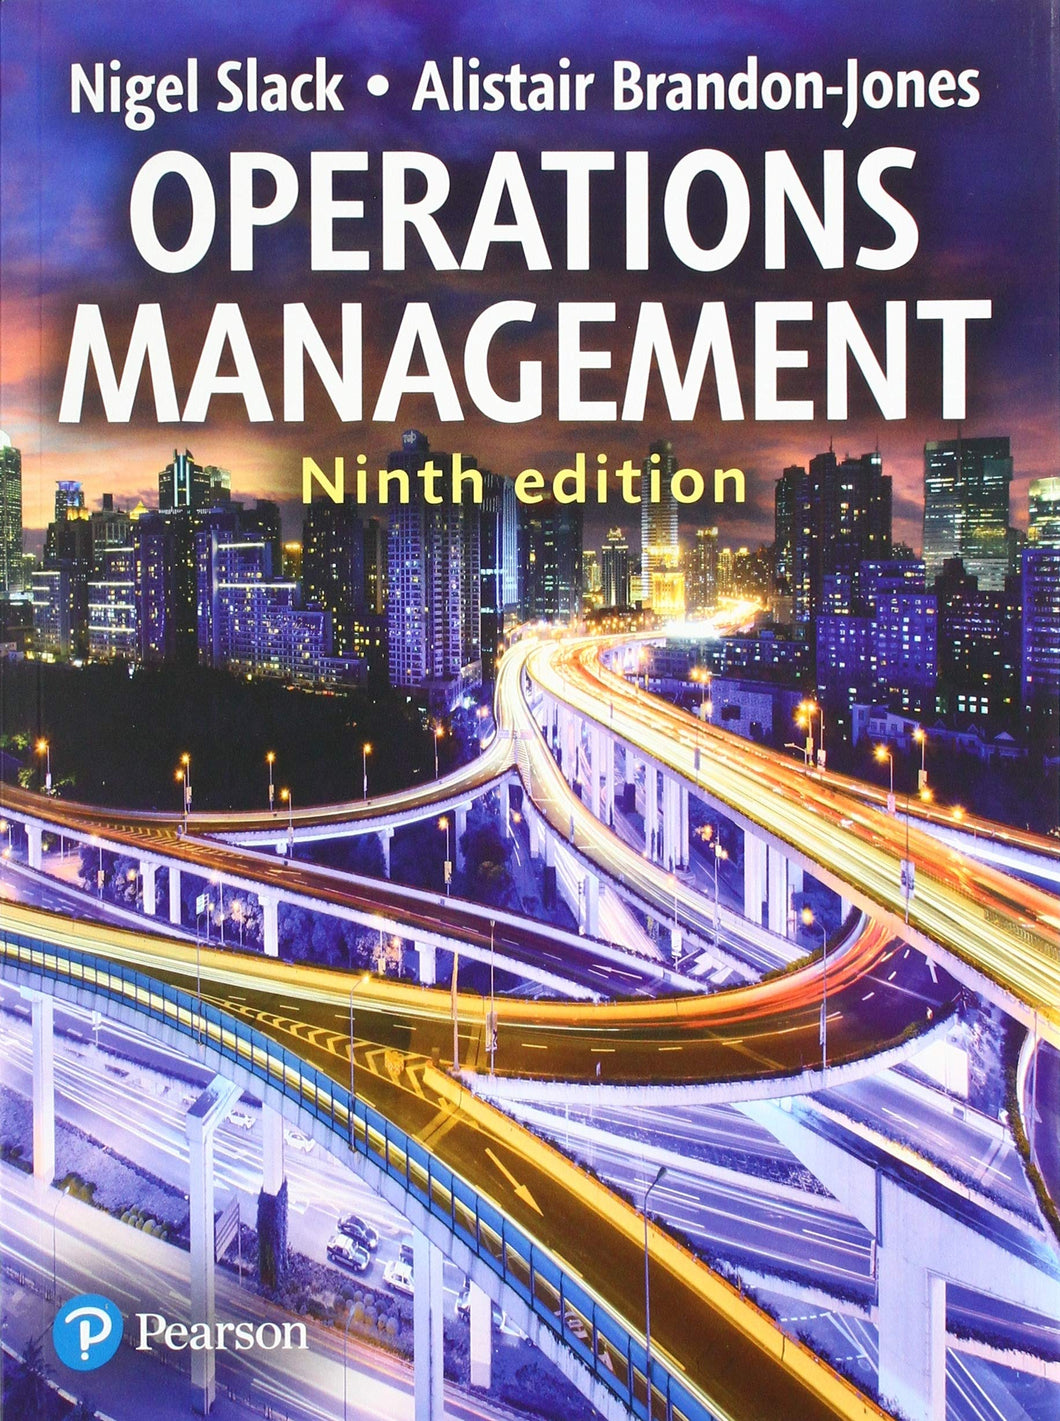 Operations Management with MyOMLab [Paperback] 9e  by Prof Nigel Slack